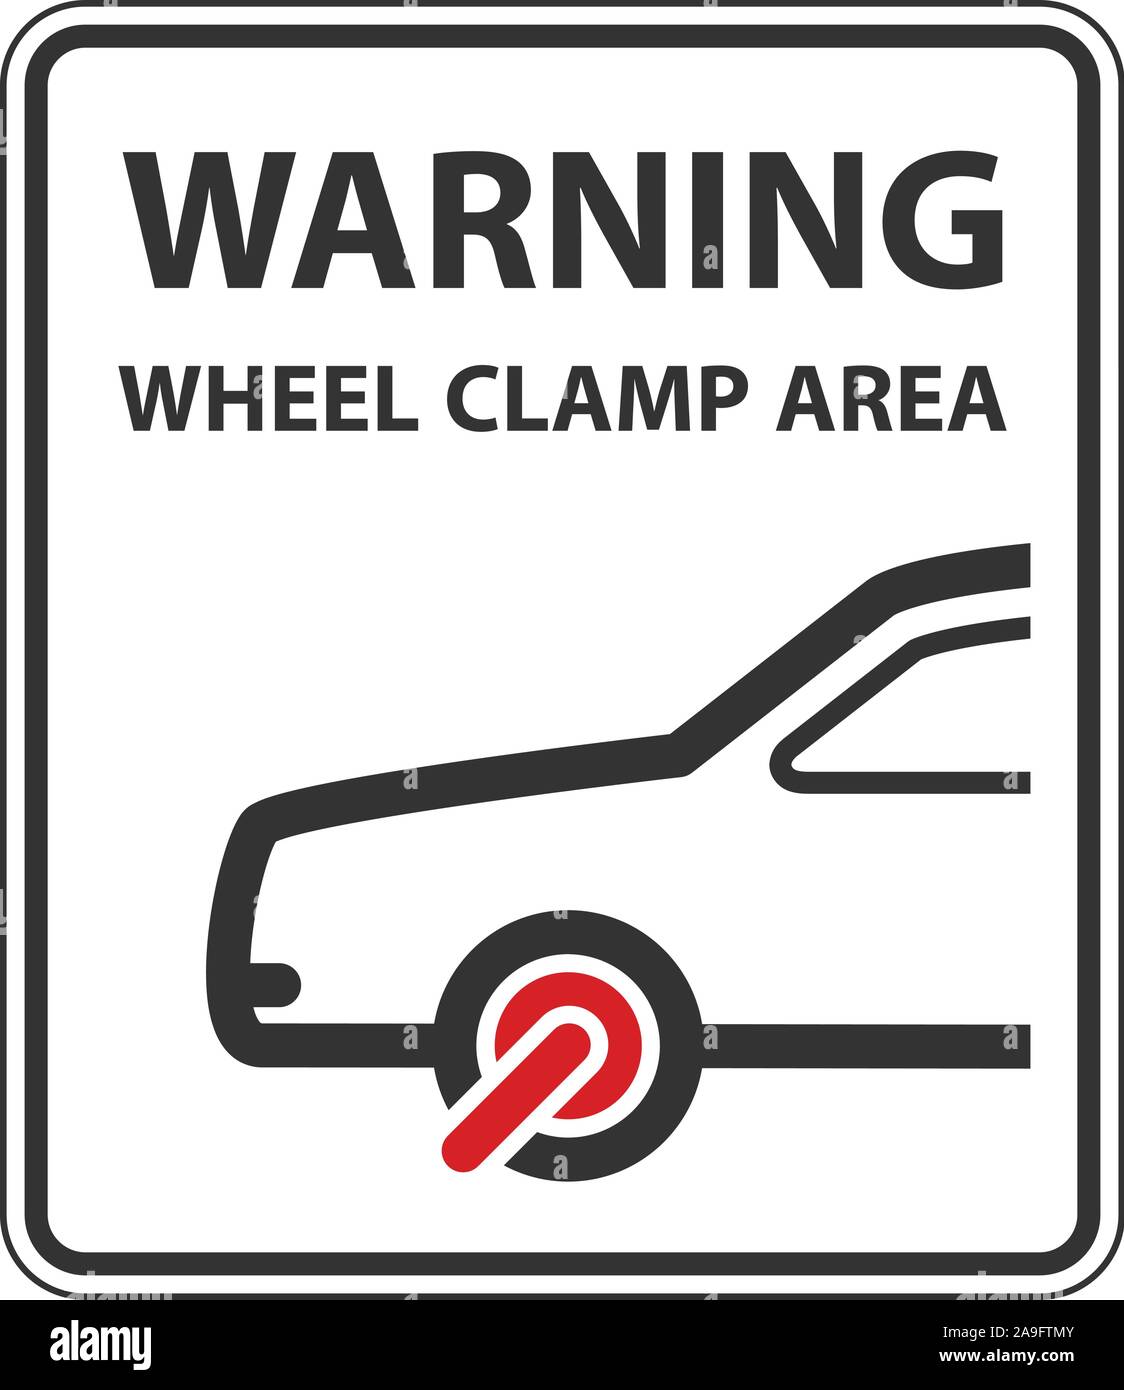 No parking warning sign with car clamped wheel - clamp symbol Stock Vector